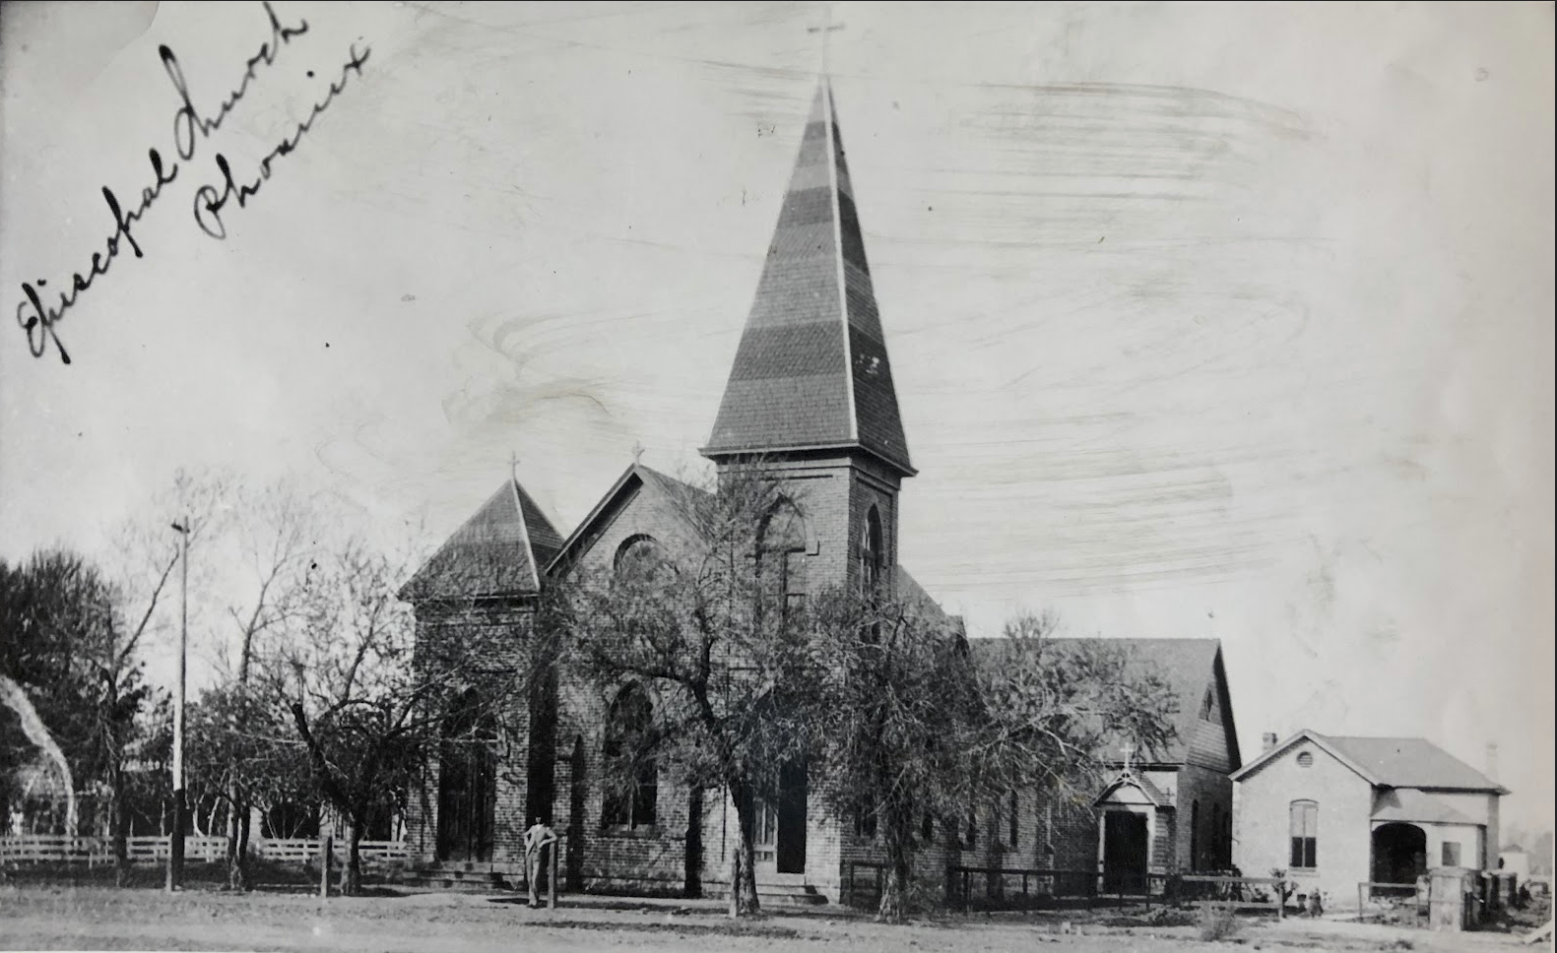 https://trinitycathedral.com/wp-content/uploads/2021/10/Trinity-Episcopal-1890.png